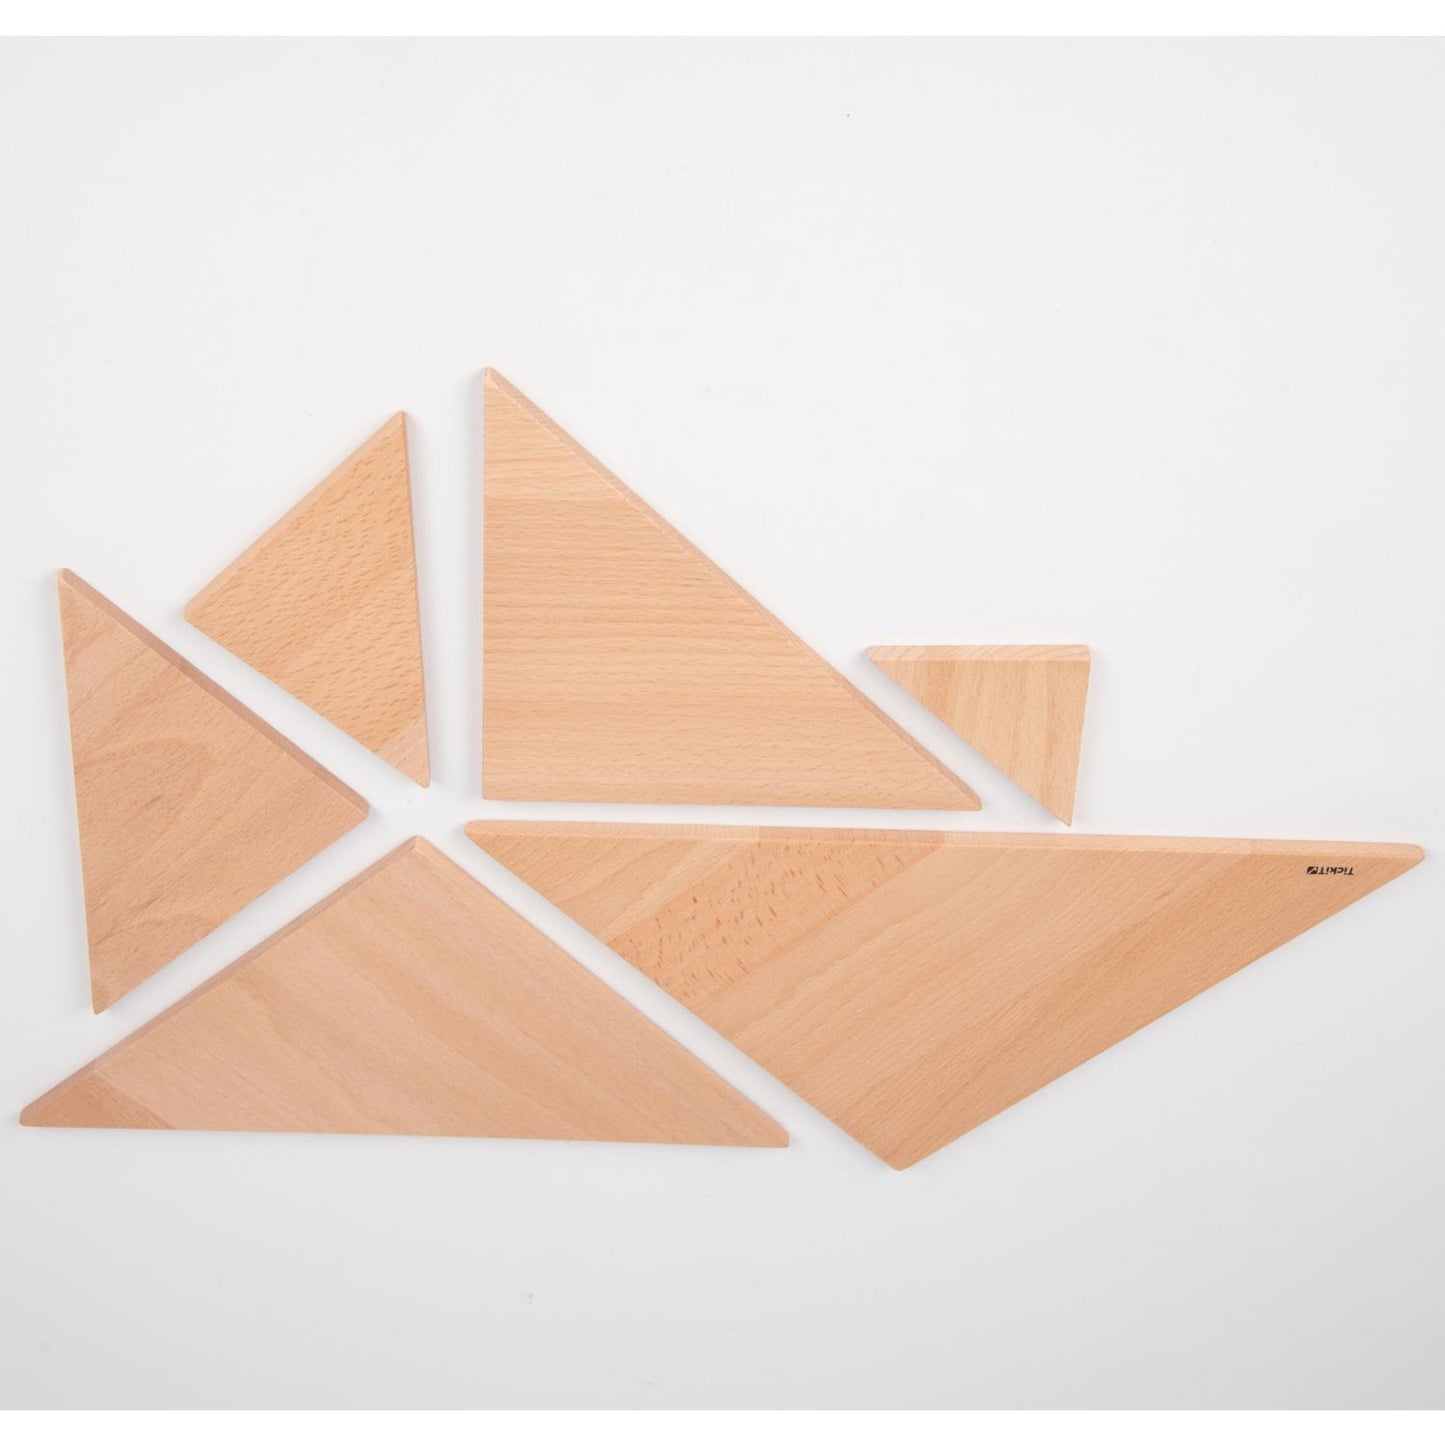 Natural Wooden Triangular Panels | 6 Pieces | Wooden Activity Toy